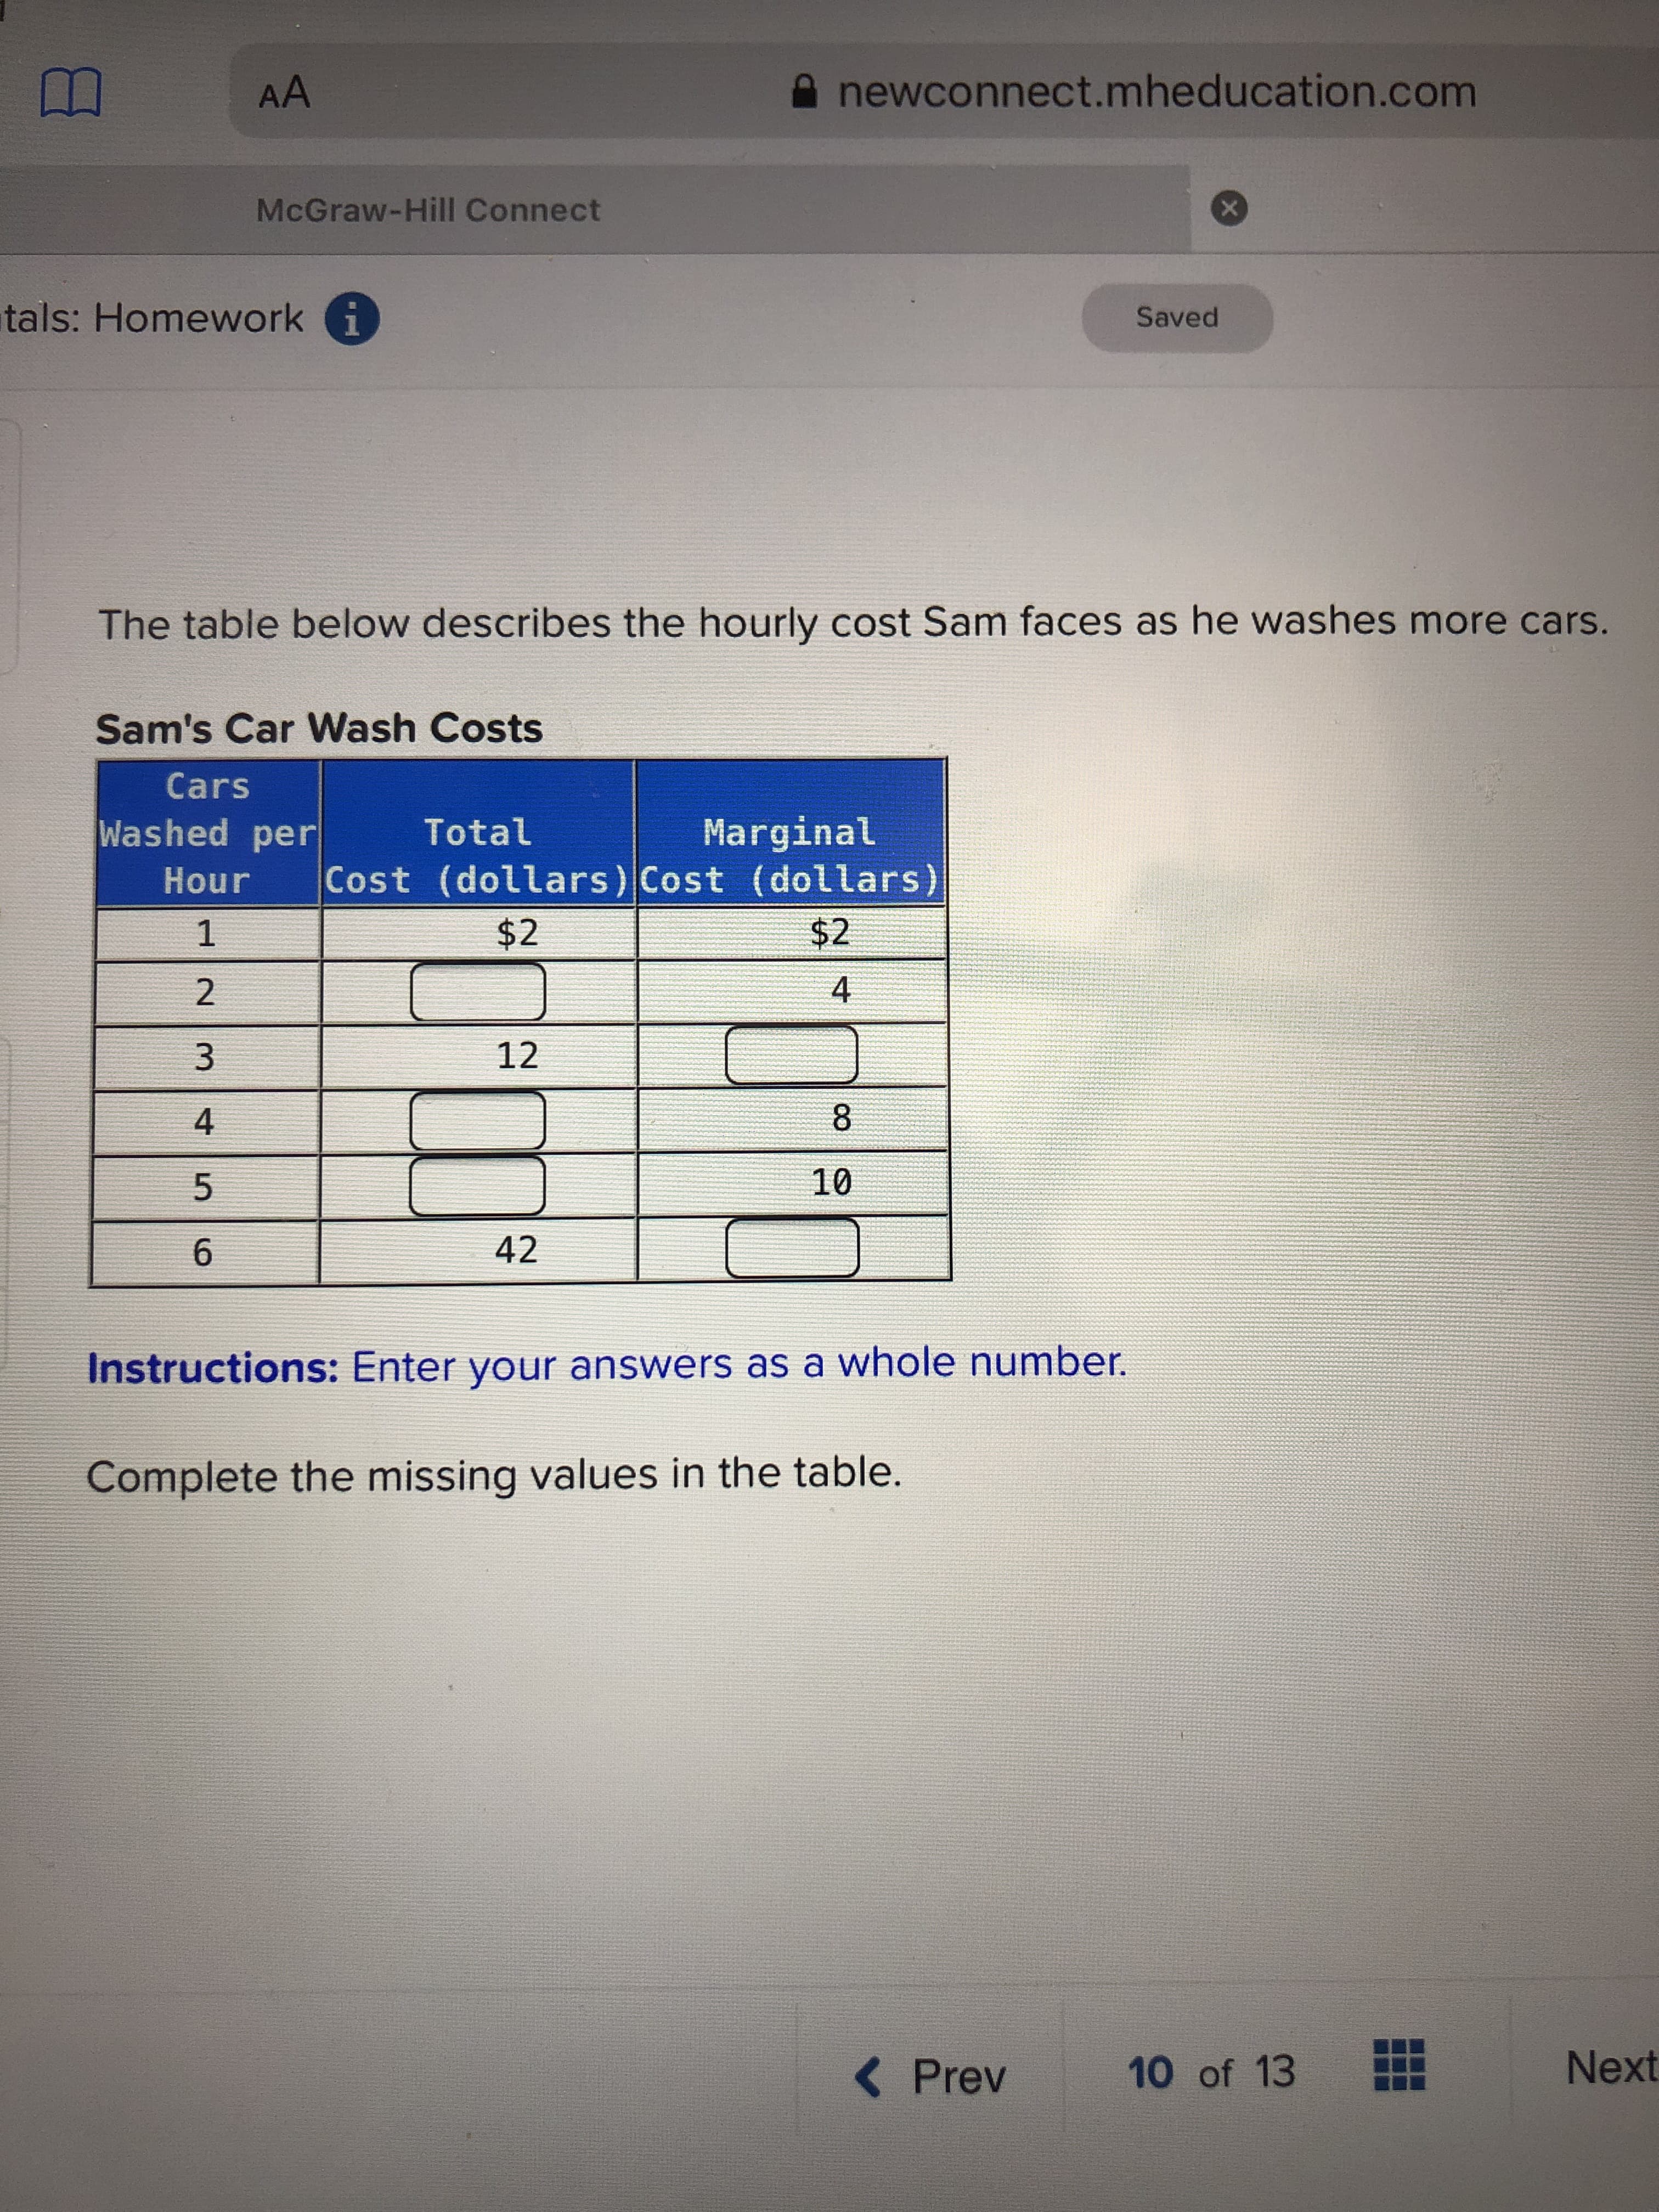 AA
newconnect.mheducation.com
McGraw-Hill Connect
tals: Homework i
Saved
The table below describes the hourly cost Sam faces as he washes more cars.
Sam's Car Wash Costs
Cars
Washed per
Marginal
Cost (dollars) Cost (dollars)
Total
Hour
$2
$2
1
12
8
10
42
Instructions: Enter your answers as a whole number.
Complete the missing values in the table.
Next
< Prev
10 of 13
4)
4,
